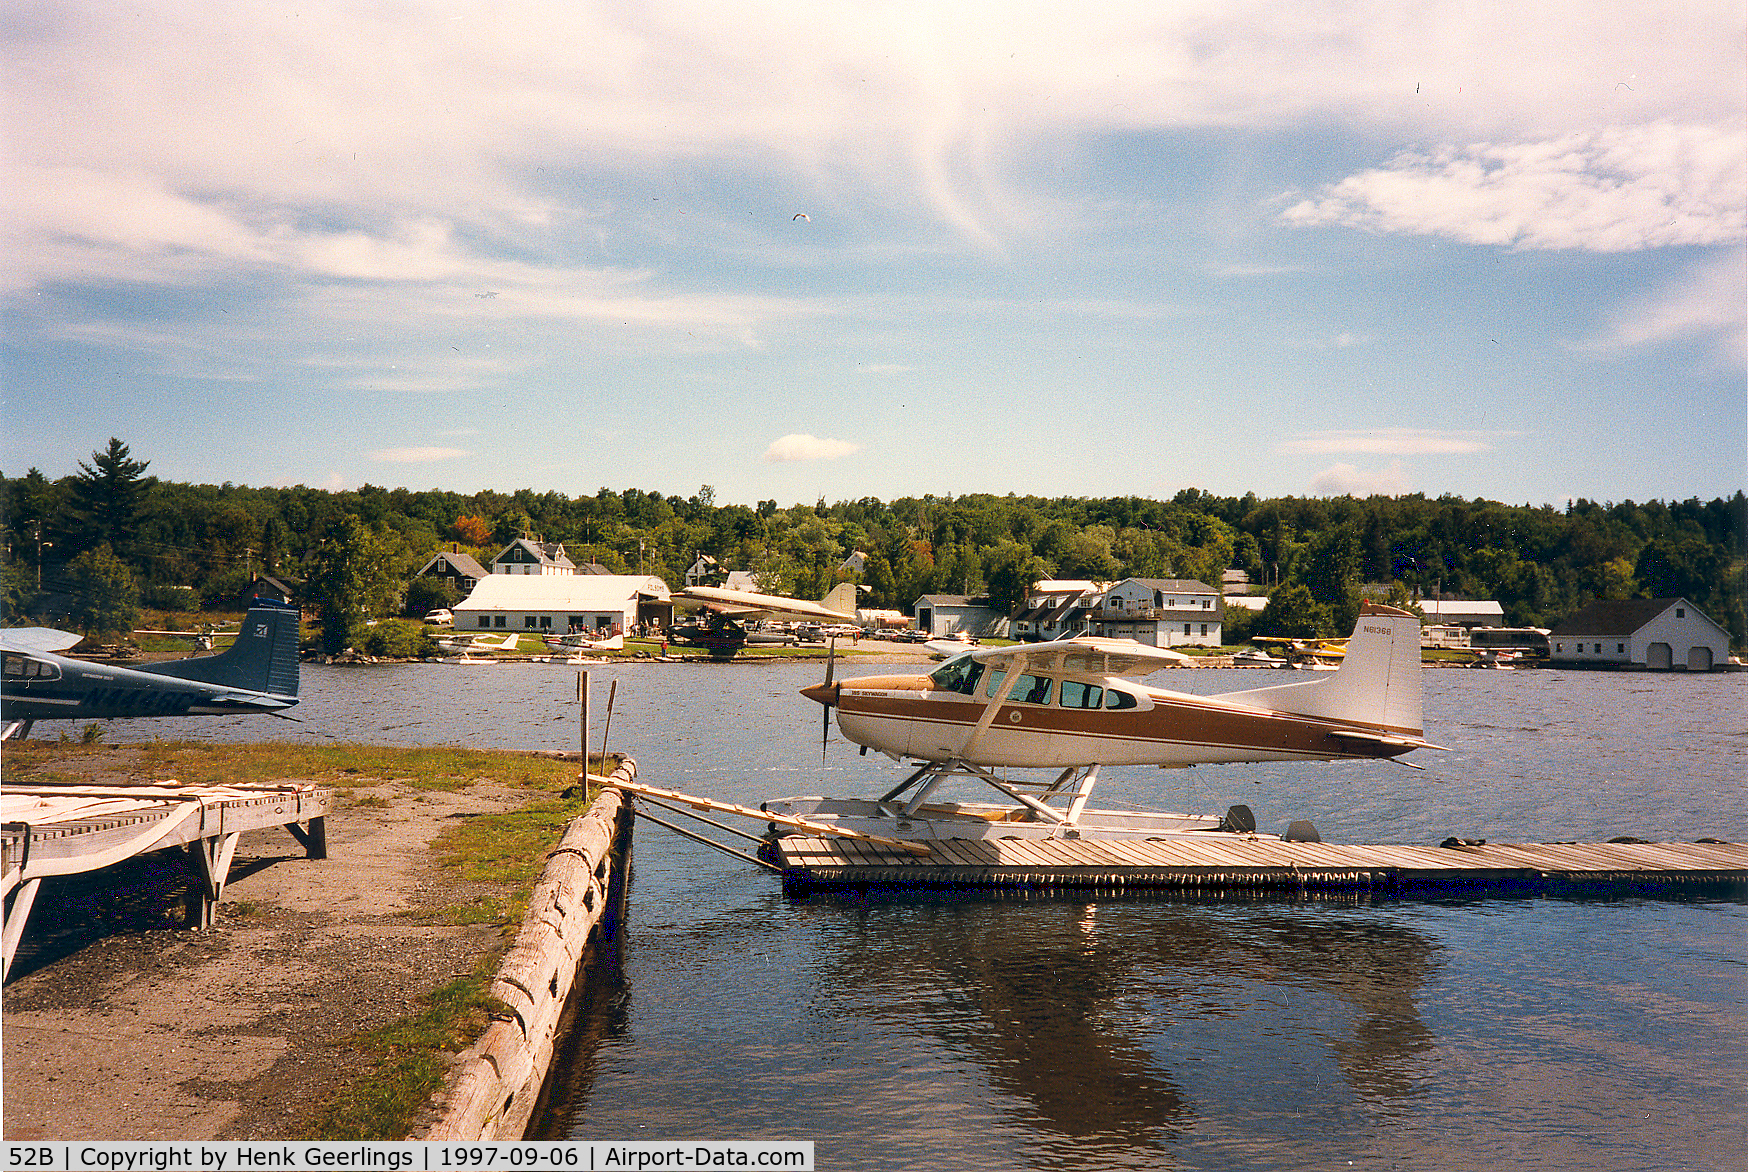 Greenville Seaplane Base (52B) - Seaplane Fly In , Moosehead Lake. In the background DC-3 on floats